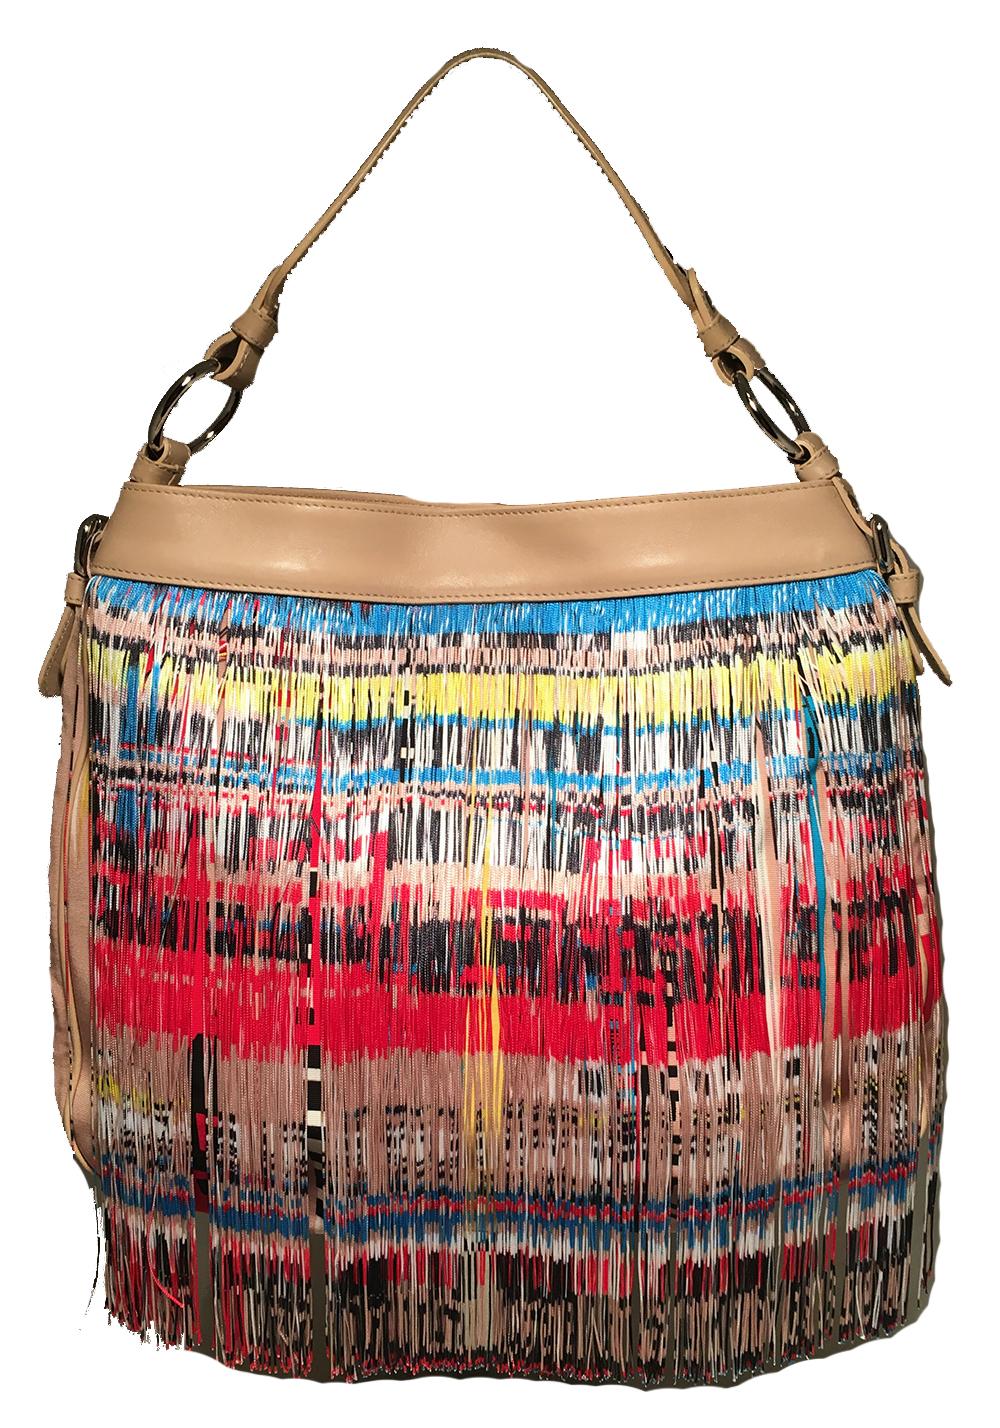 Versace Multicolor Fringe Leather and Twill Frida Hobo Shoulder Bag in excellent condition. Multicolor nylon fringe over a multicolor striped print canvas body. Tan leather trim with silver hardware. Bottom zipper stretches side to side and adds an